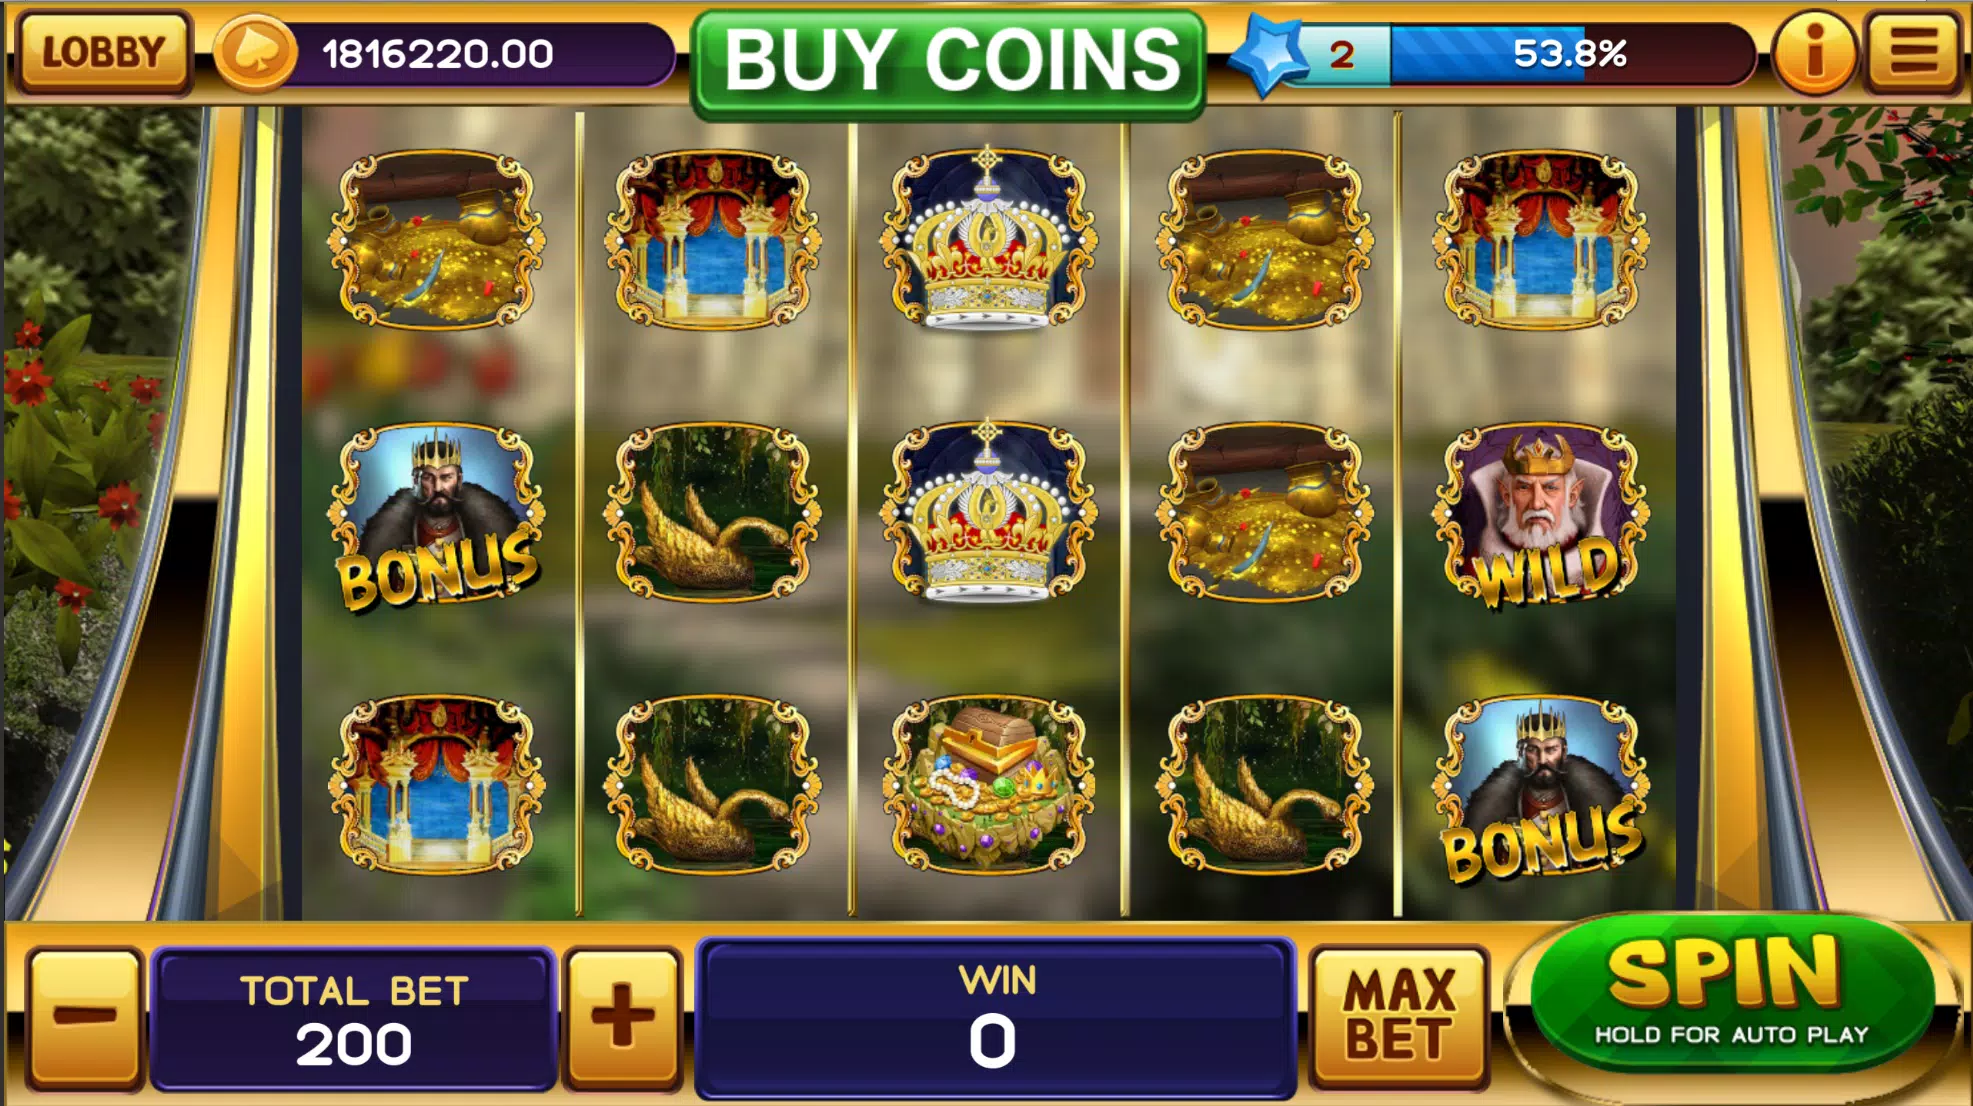 Midas Golden Touch Slot - Free Play and Reviews